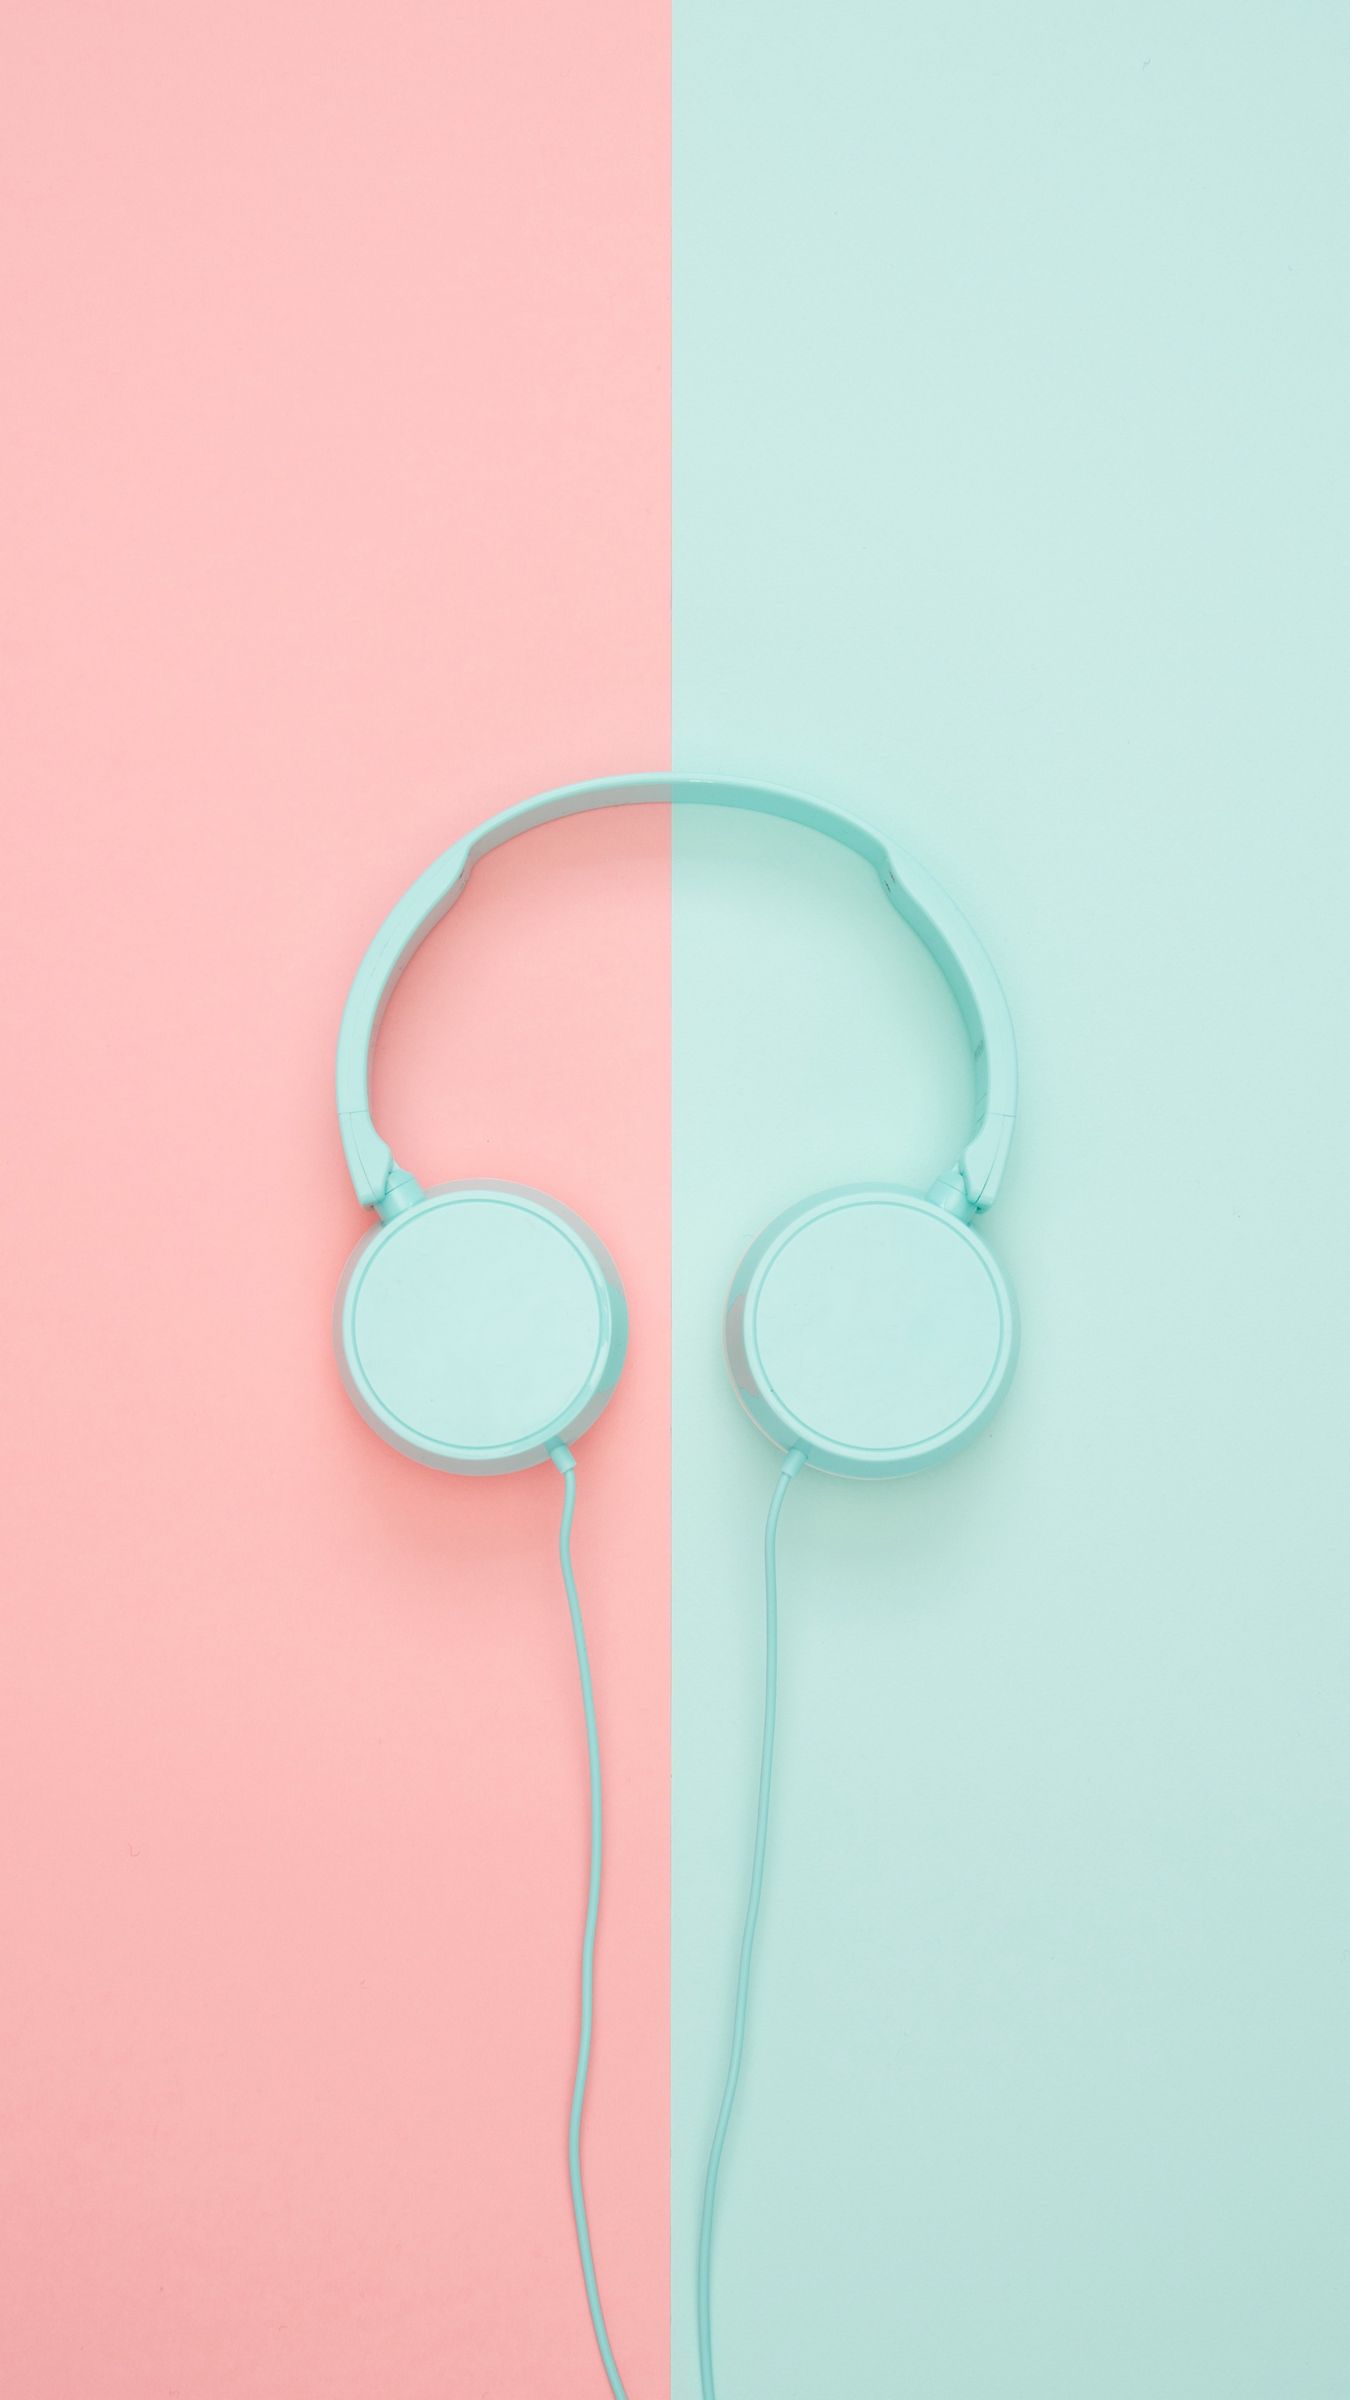 Download wallpaper 1350x2400 headphones, minimalism, pastel, pink iphone  8+/7+/6s+/6+ for parallax hd background